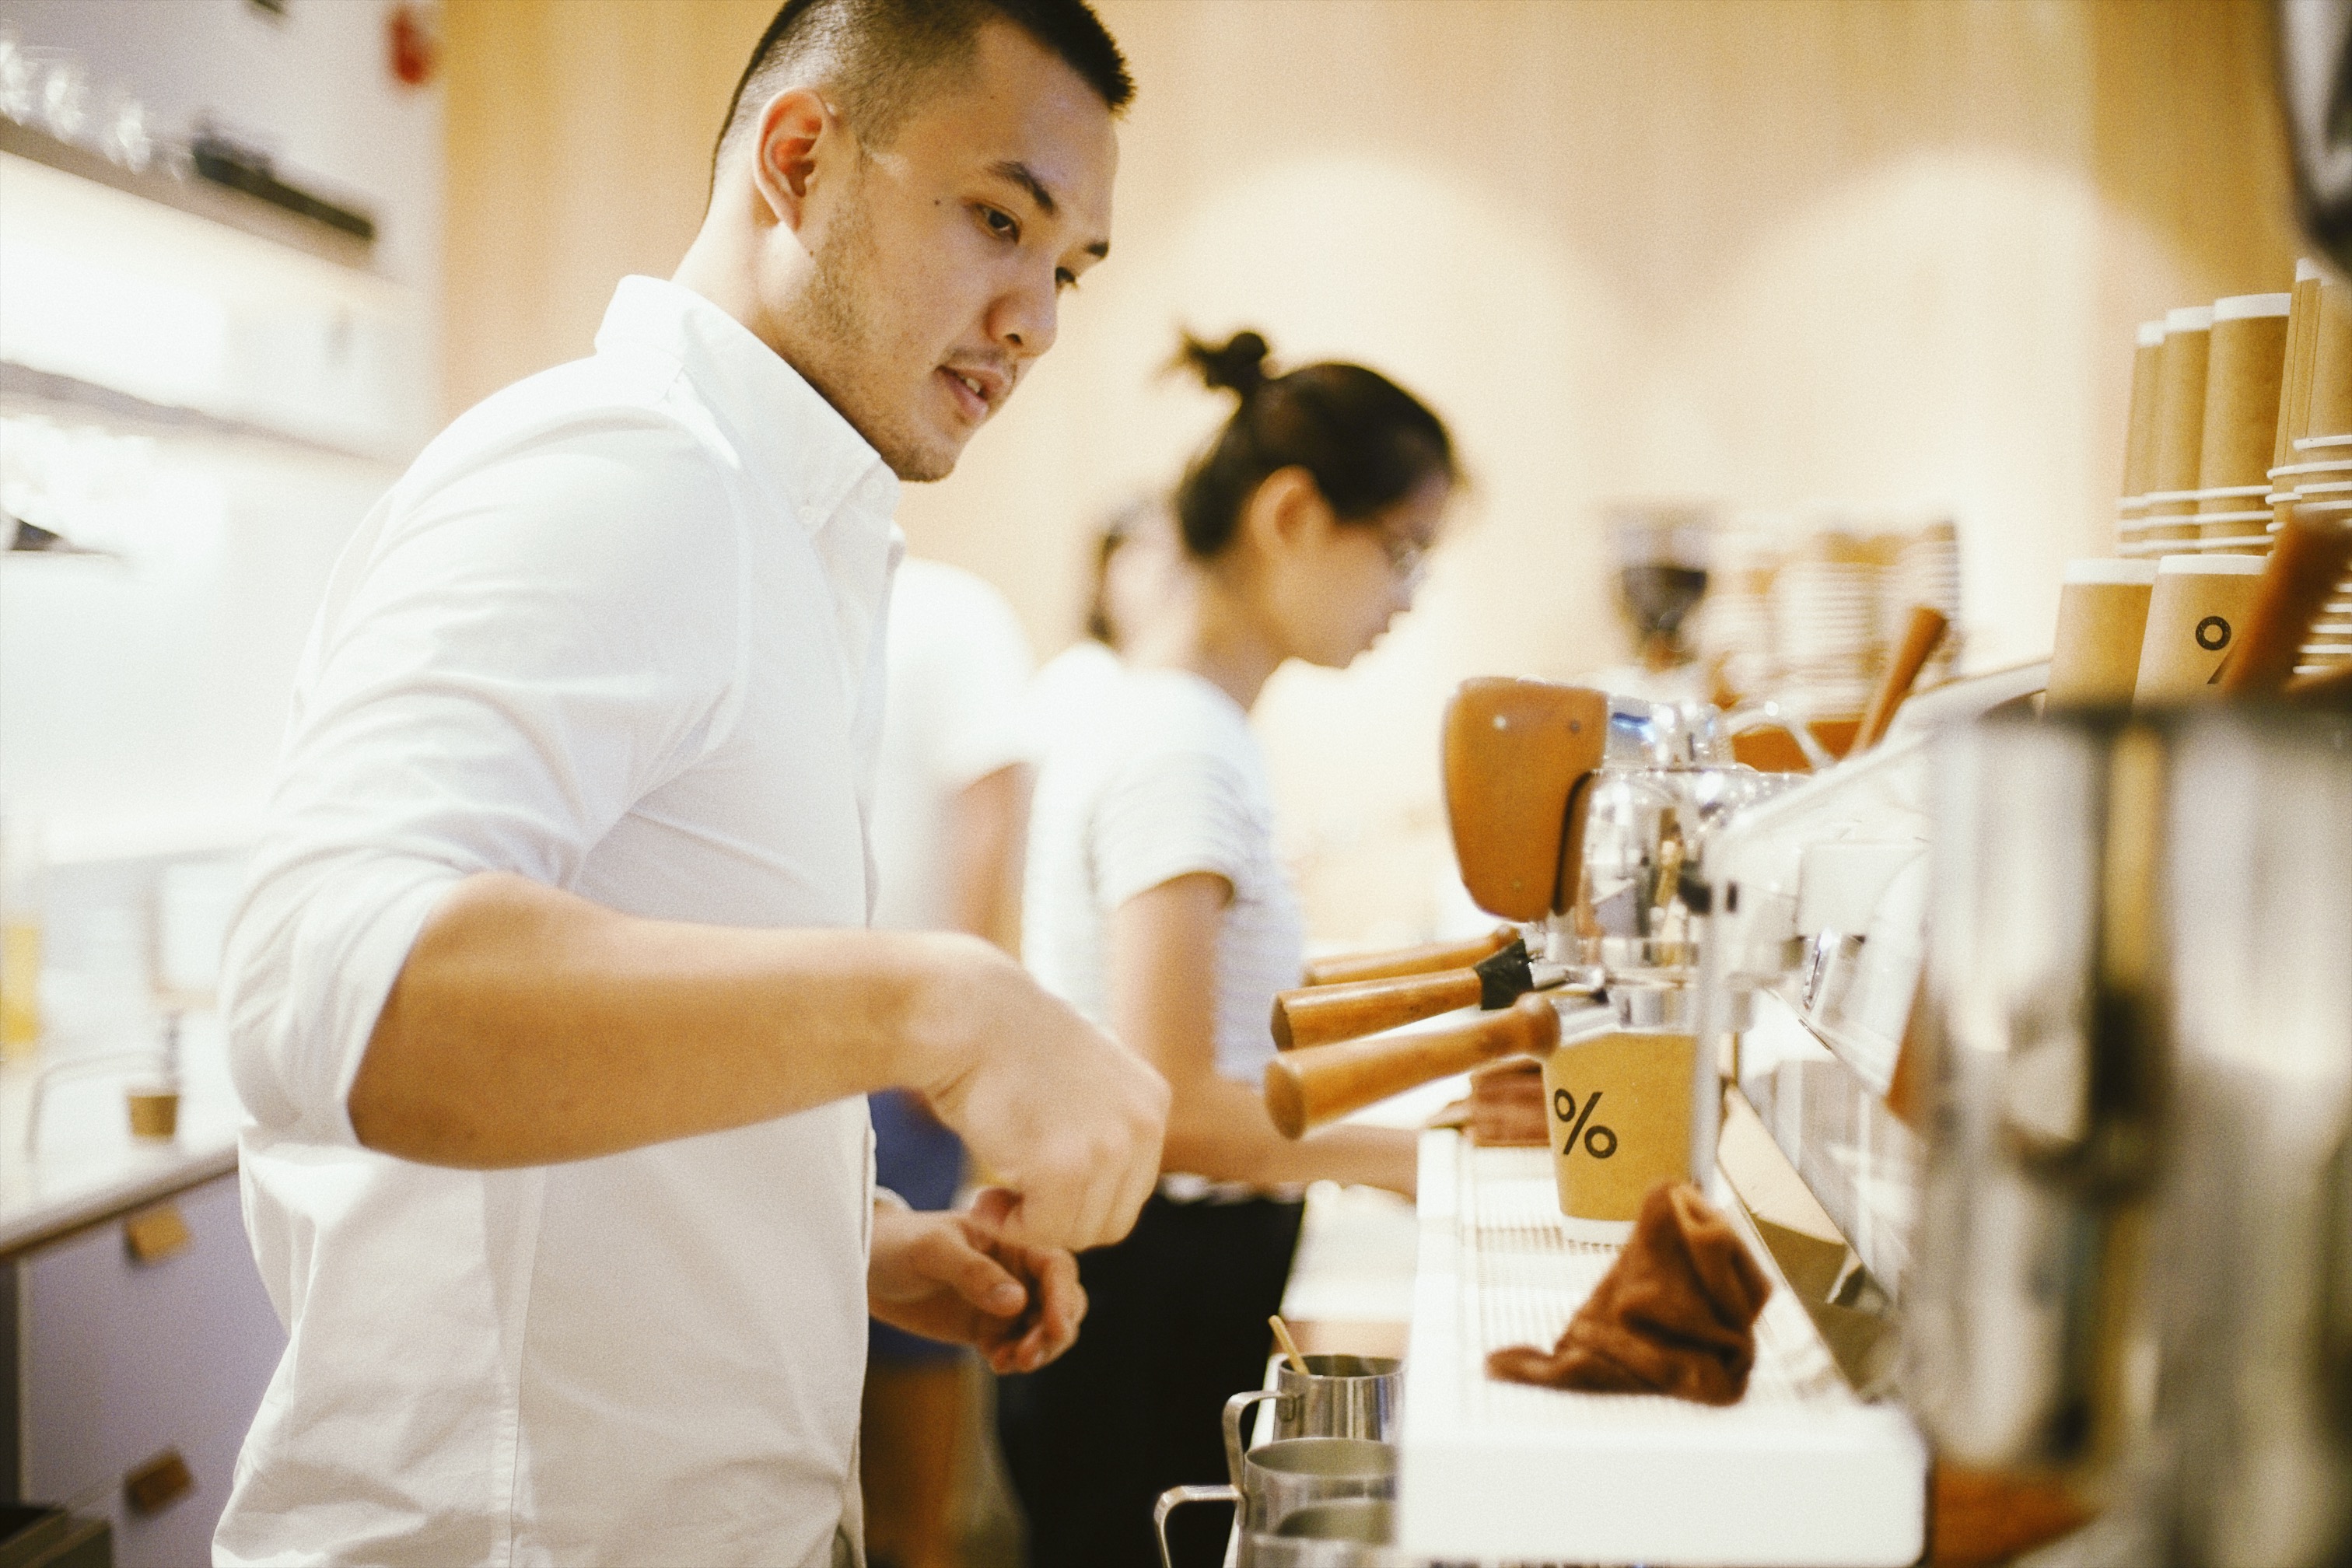 Can you guess how much coffee baristas drink in a day? NOLISOLI